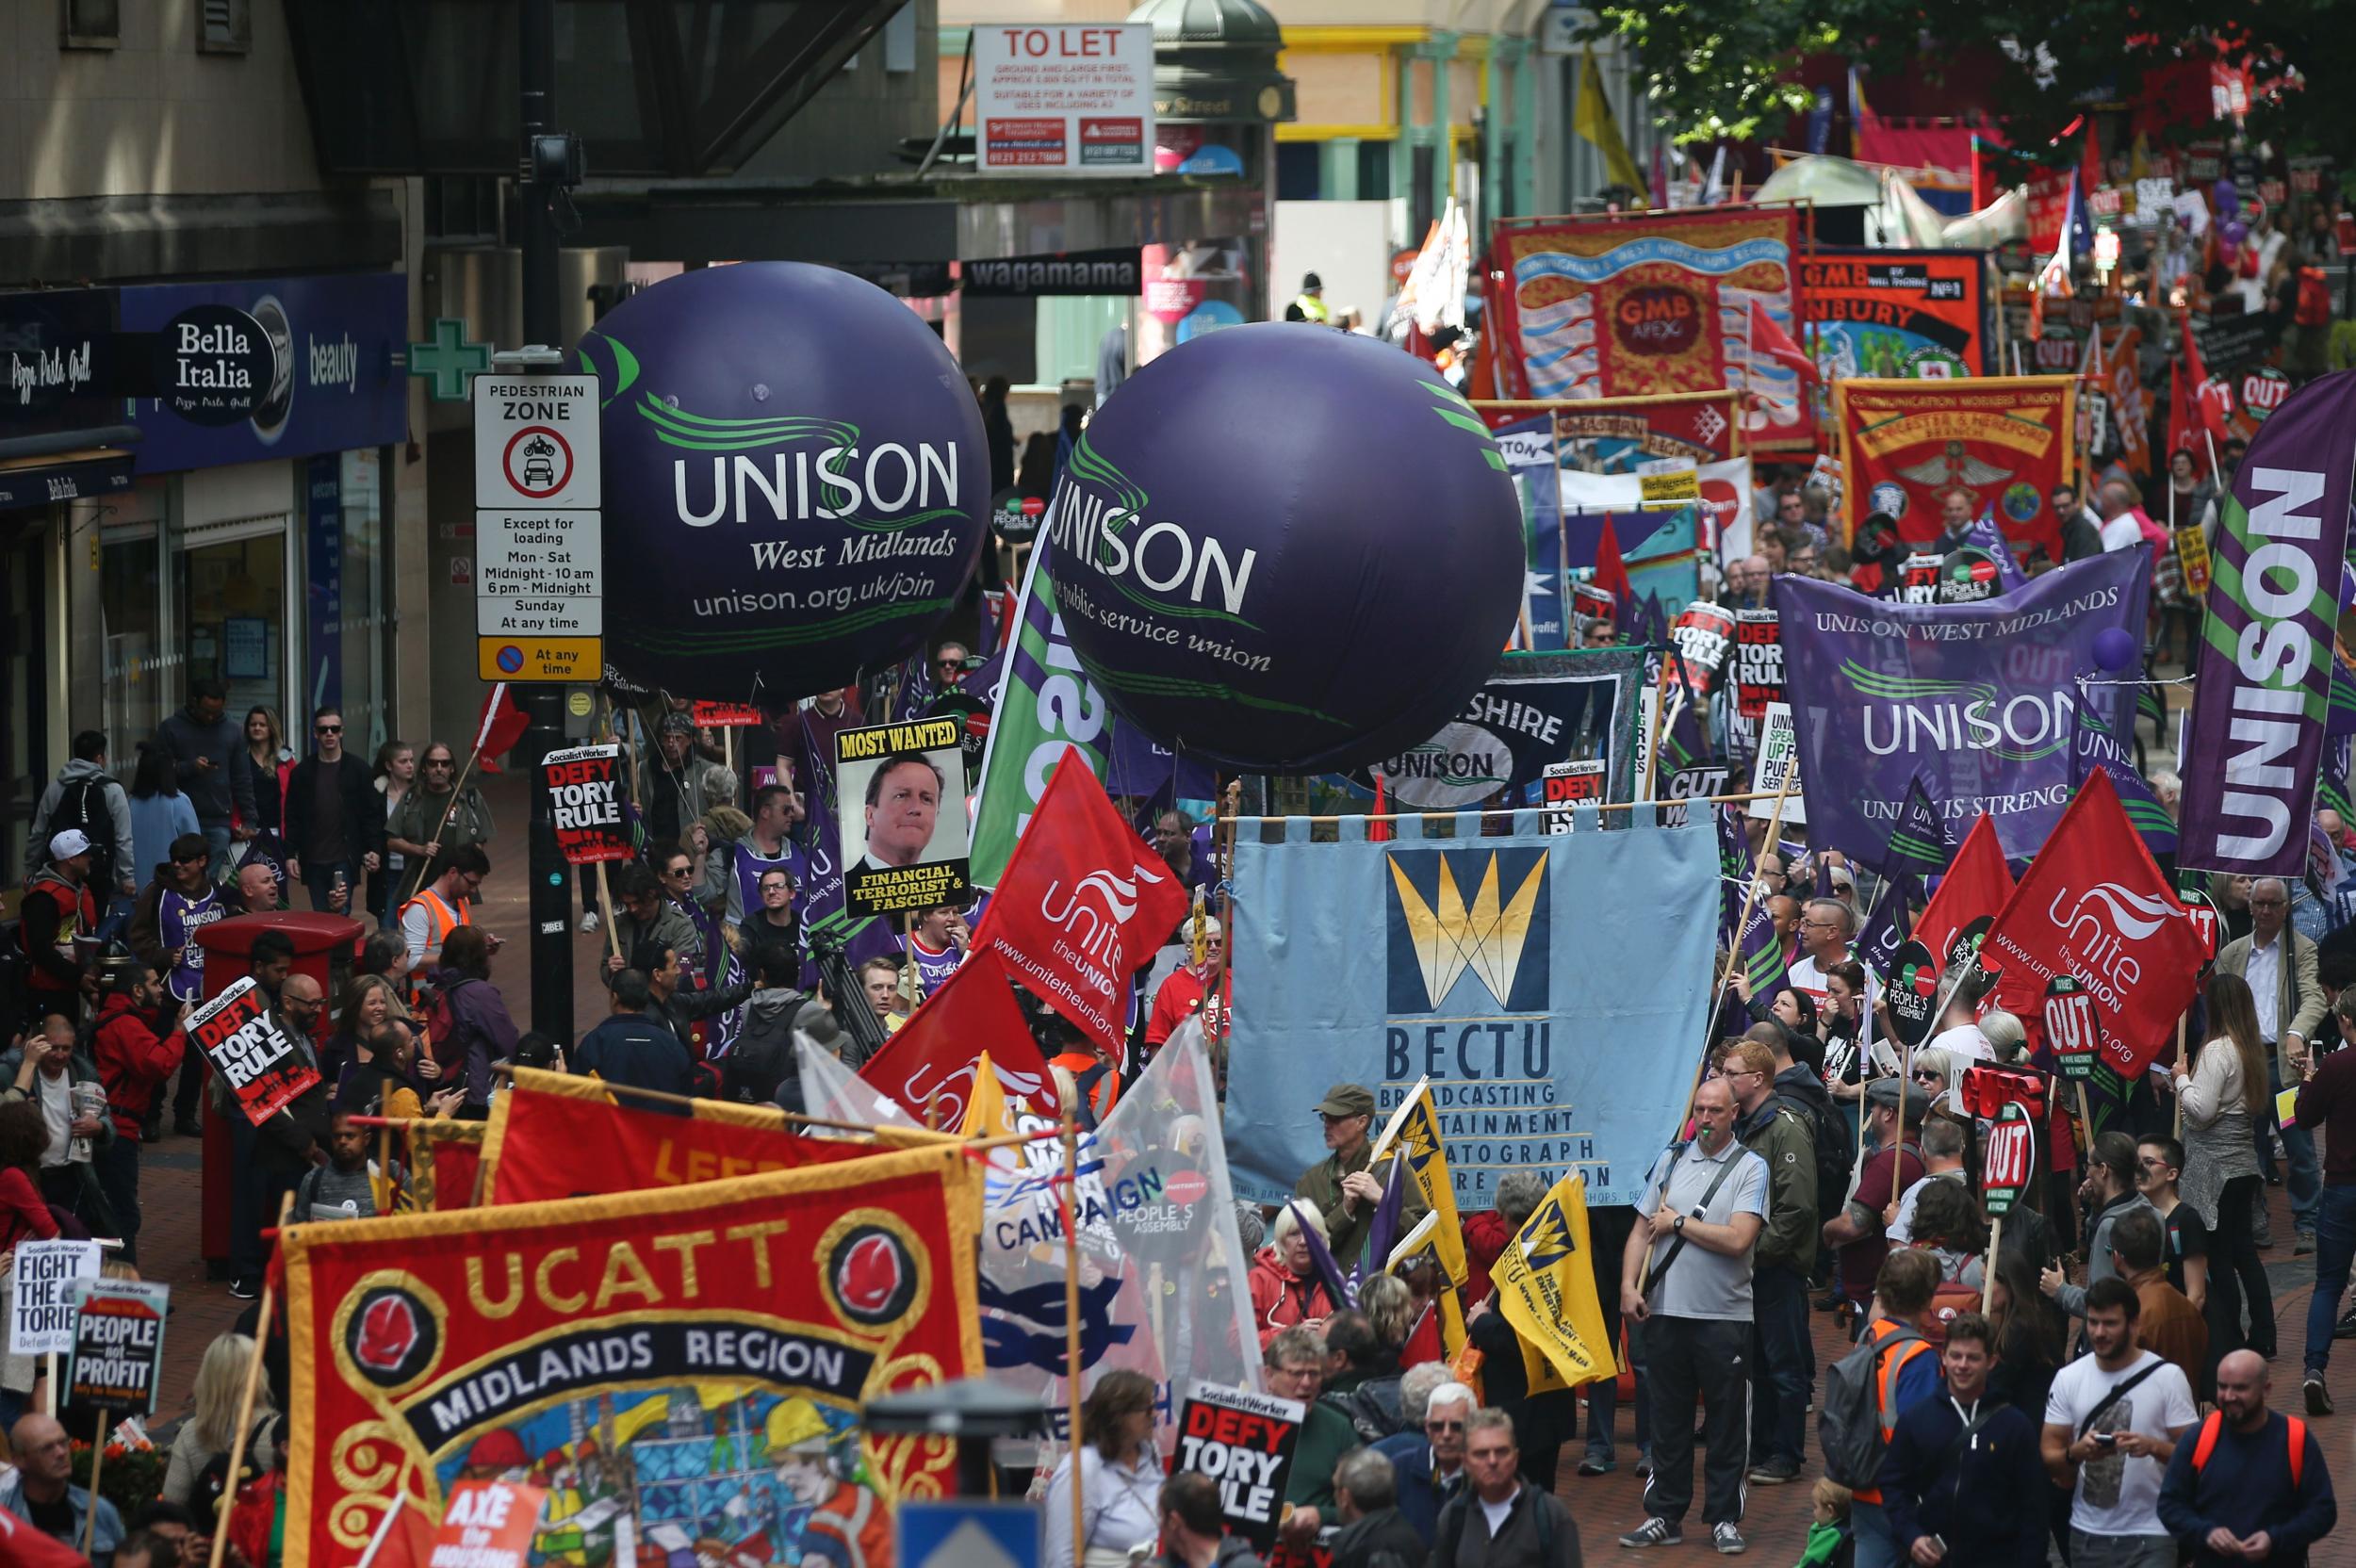 Anti-conservative protesters with placards and trade union banners march through Birmingham during Conservative party annual conference in 2016